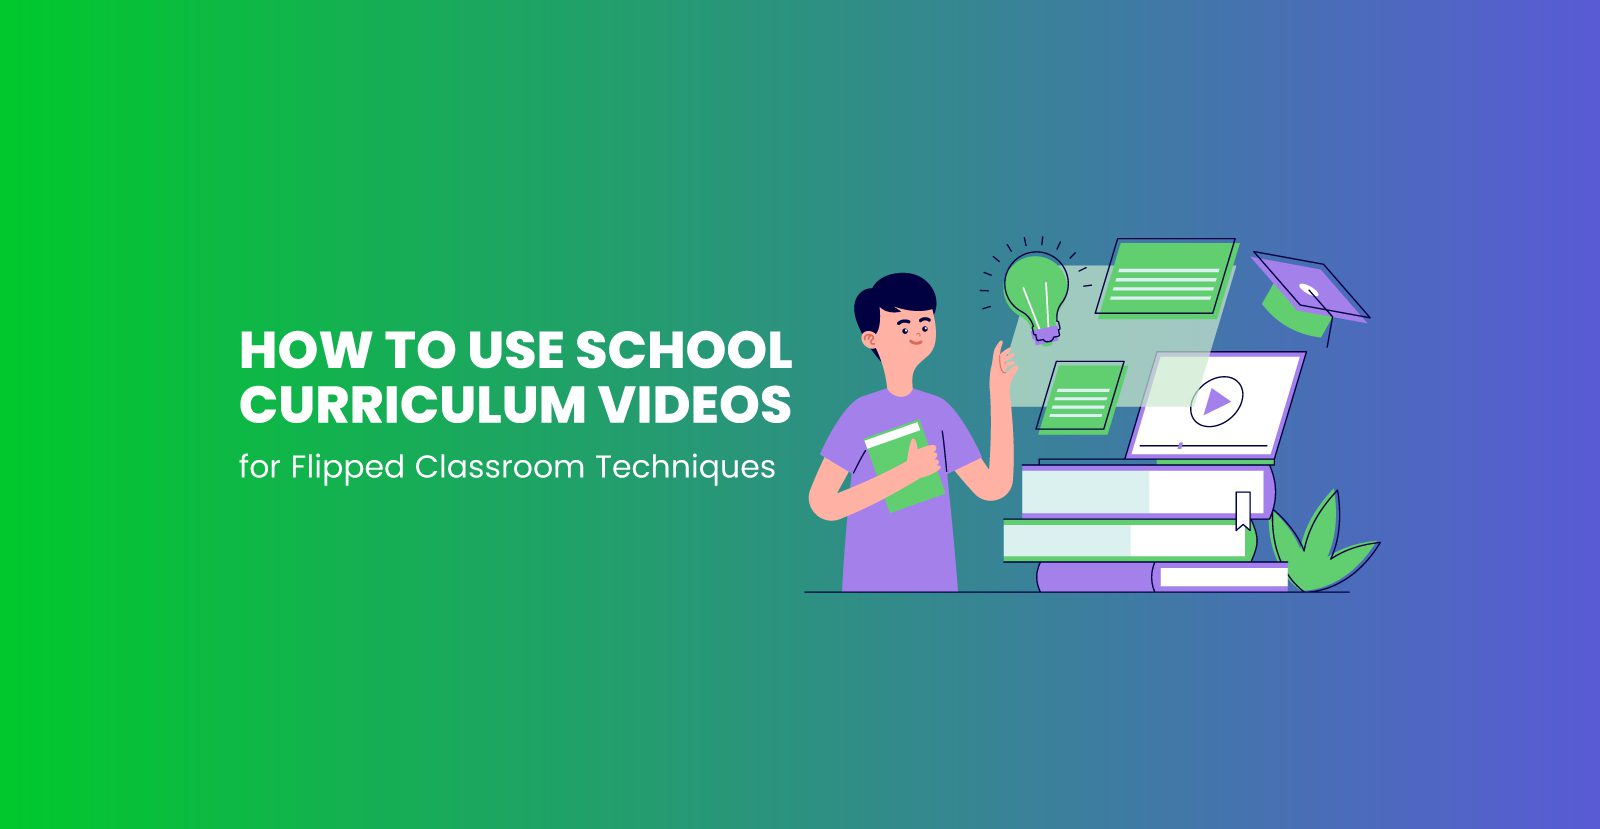 Discover the power of school curriculum videos in flipped classrooms! Learn effective strategies to engage students and transform learning.